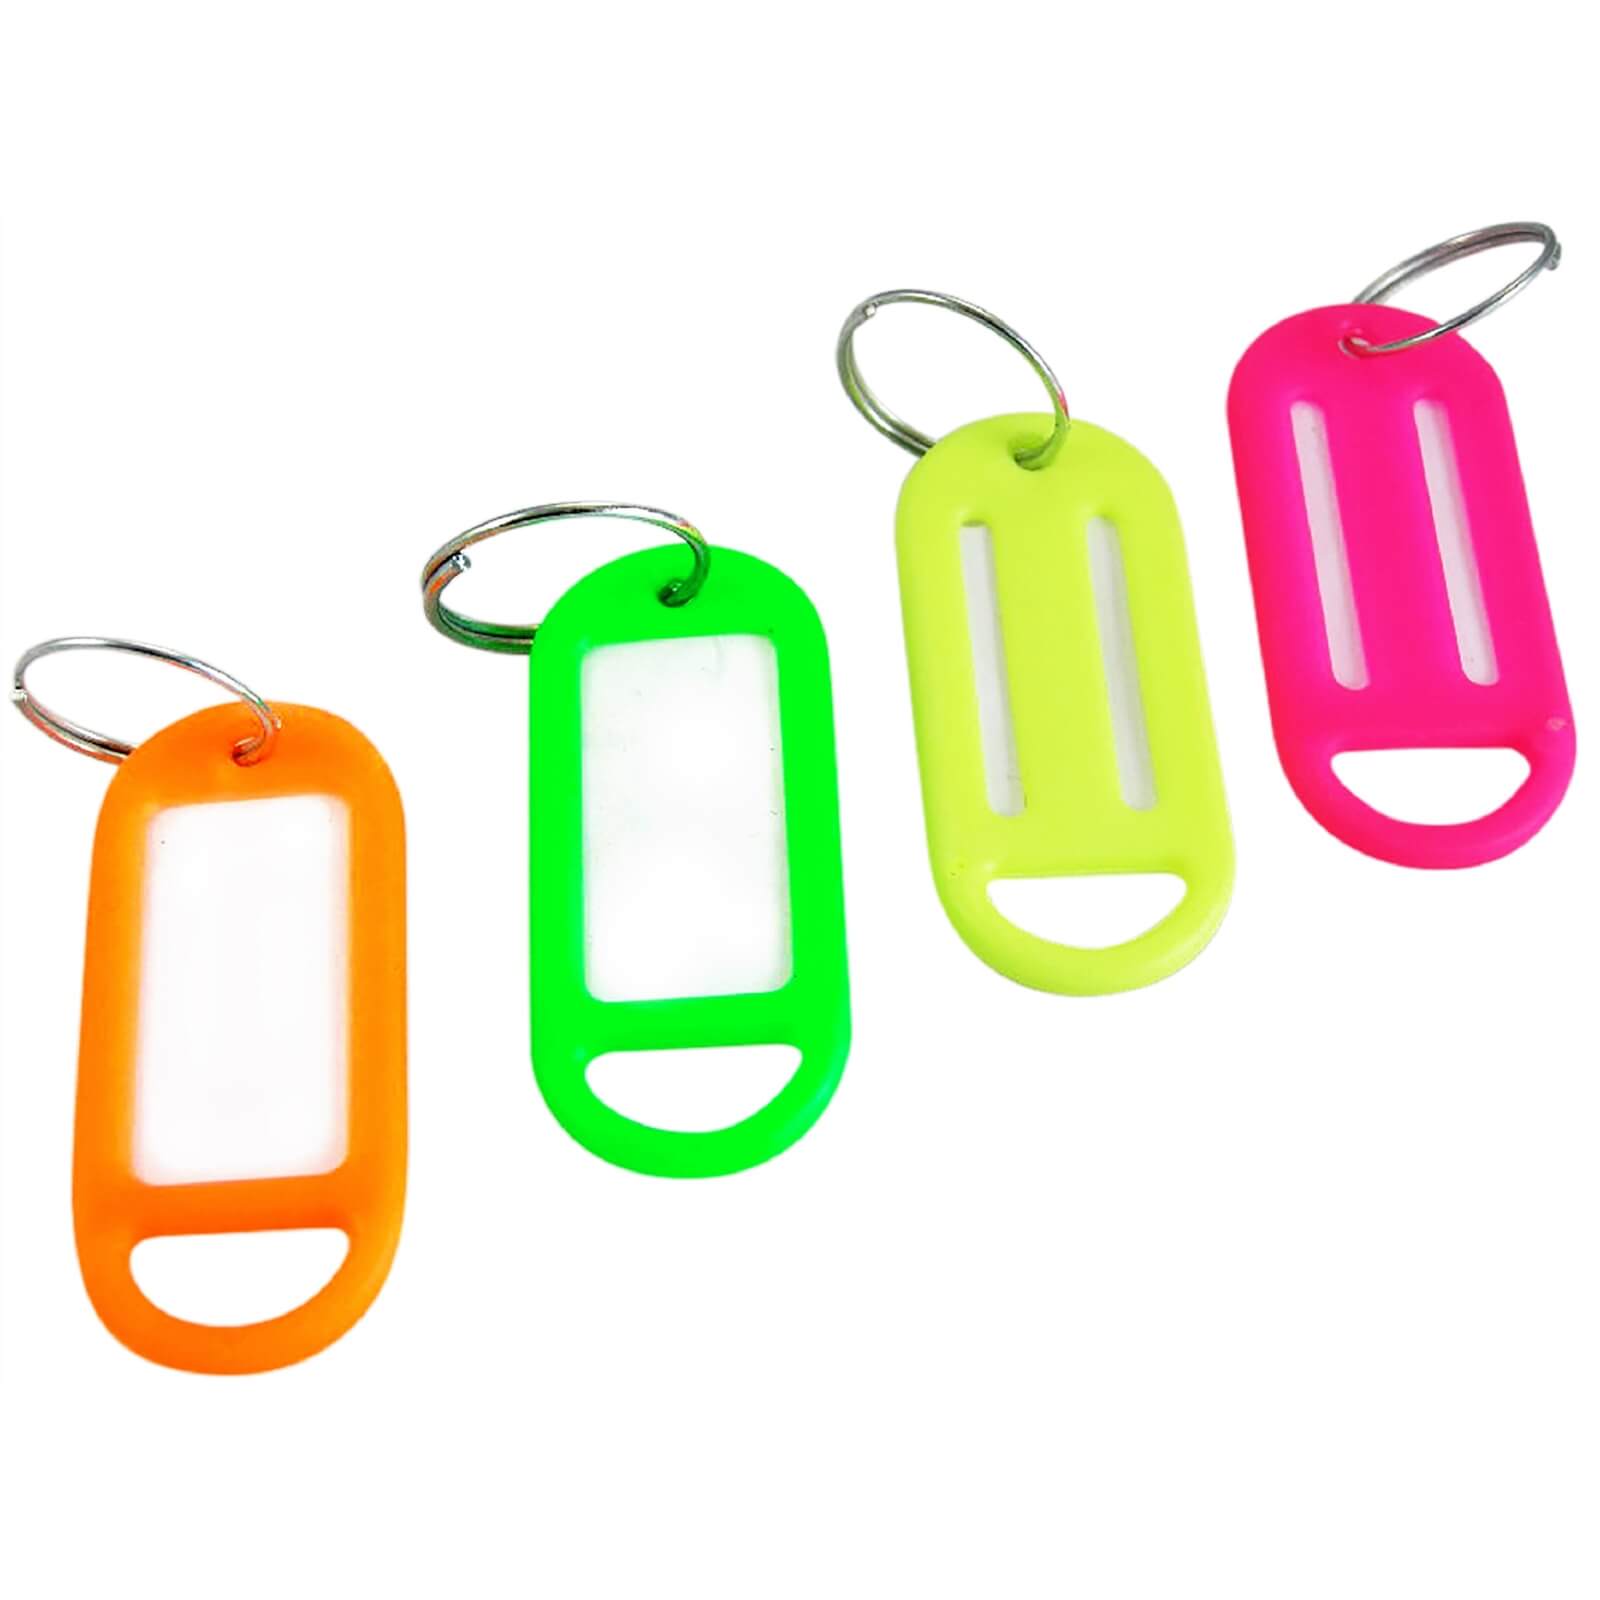 Key Rings with ID Tags - 4 Pack - Fluorescent Colours